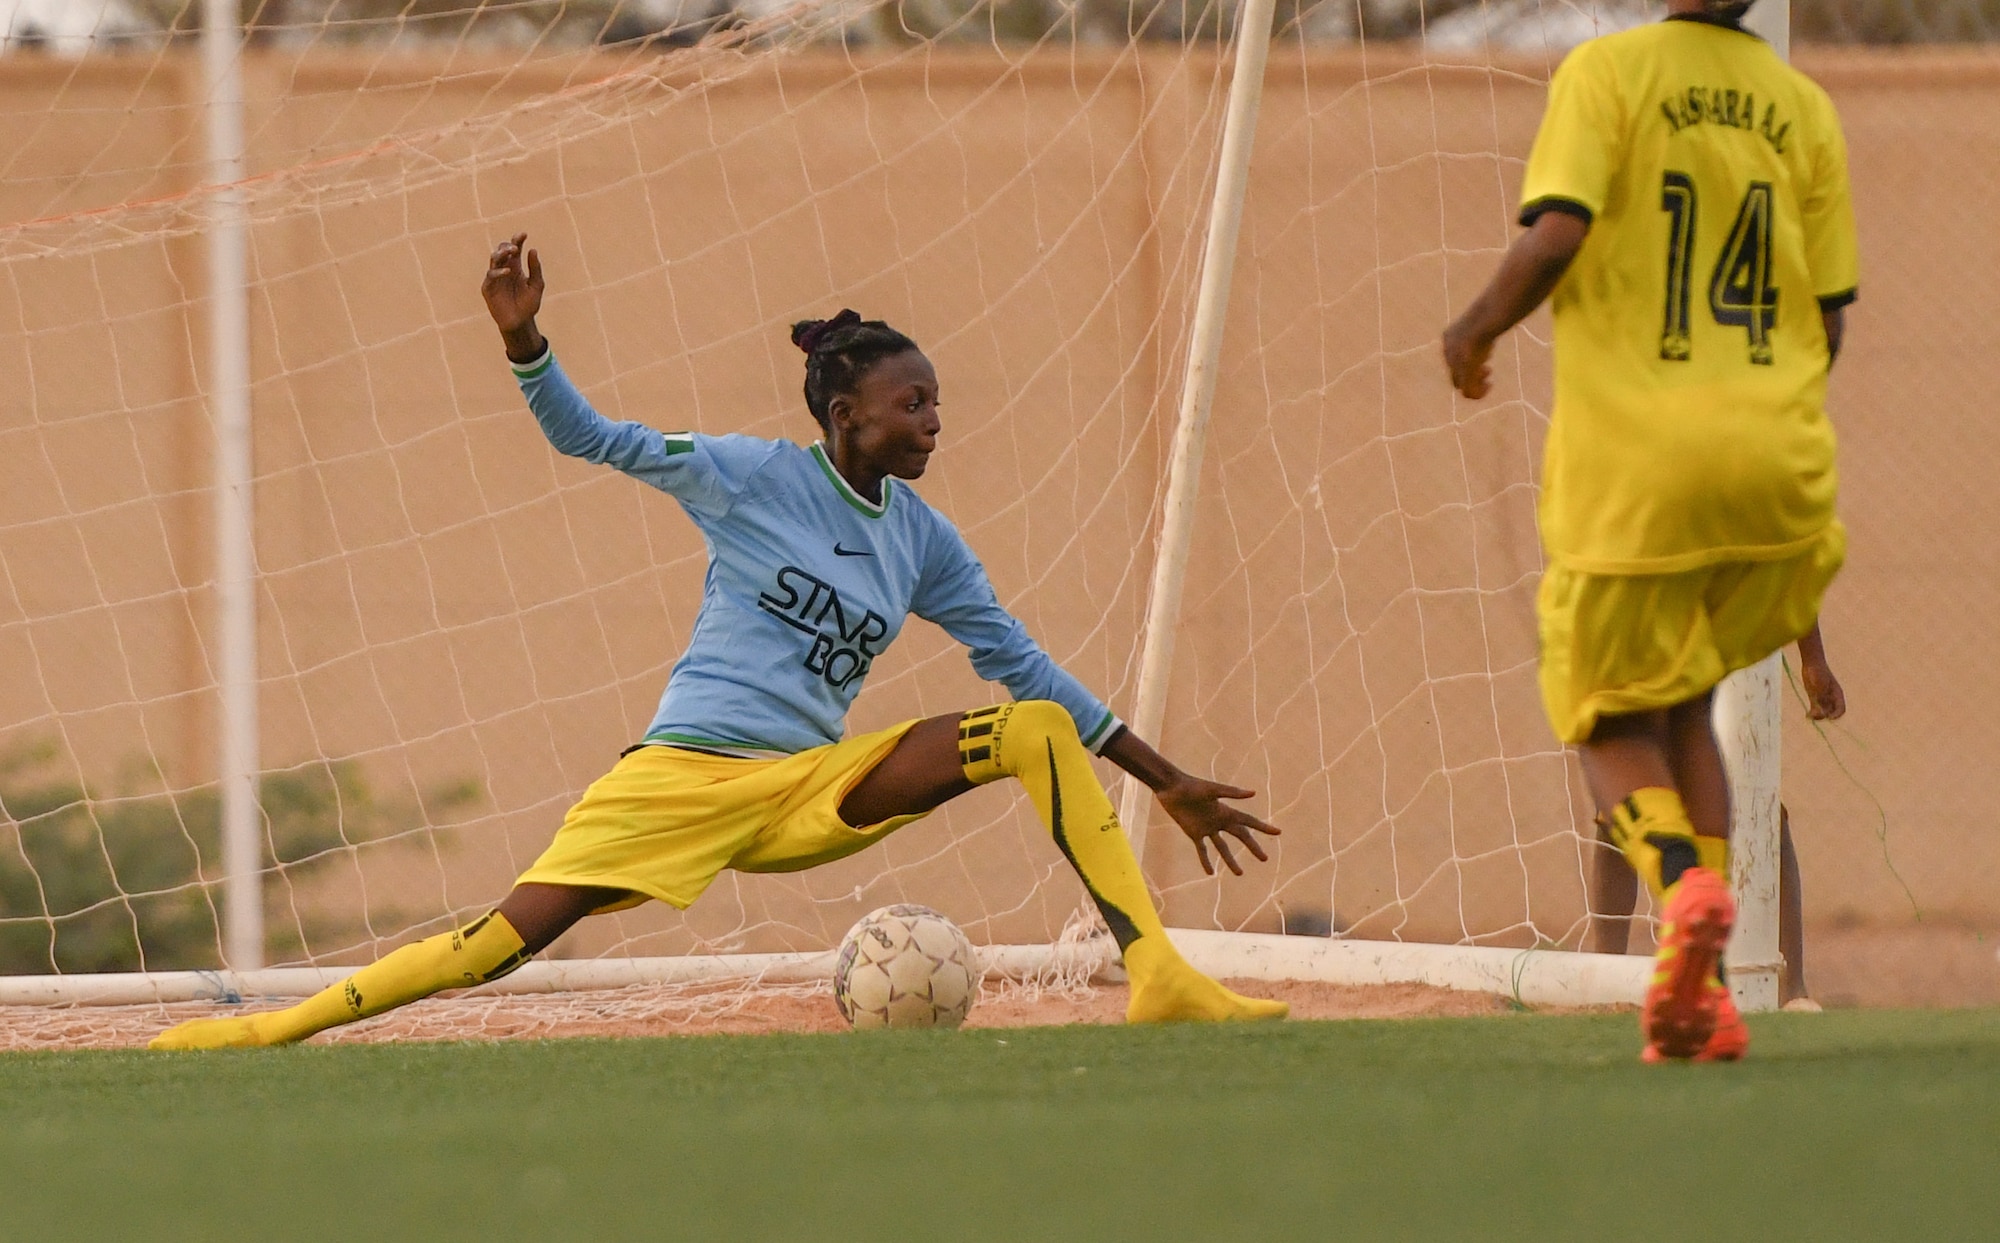 A player from the Nassara Athletic Club Women’s Soccer Team stretches to block a goal during a soccer game against U.S. Air Force women from Nigerien Air Base 201 at the Agadez Sports Stadium in Agadez, Niger, July 5, 2019. The civil affairs team held the game to build rapport and promote positive sentiment between the local community and AB 201 personnel.  (U.S. Air Force photo by Senior Airman Lexie West)